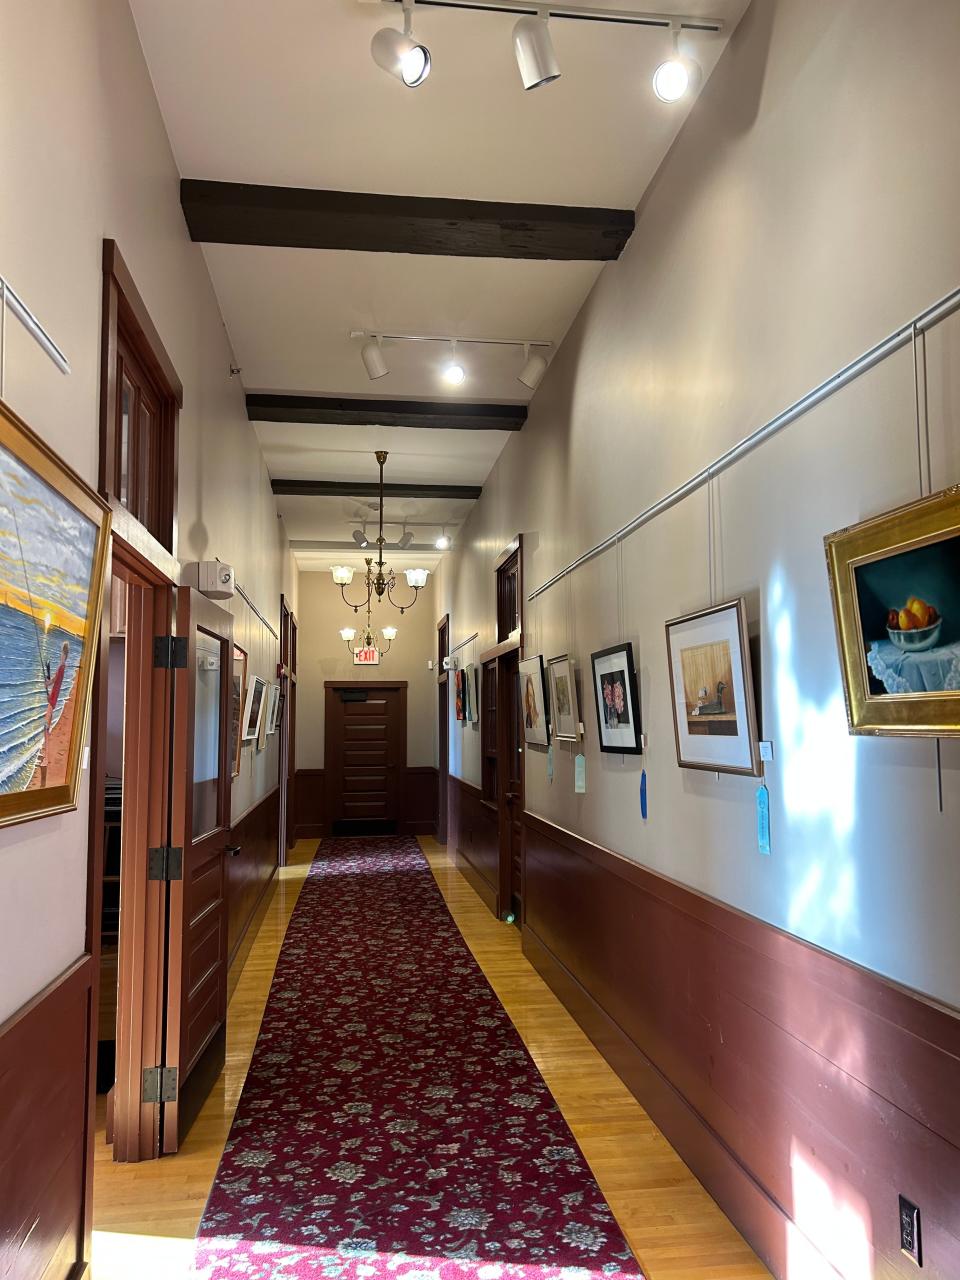 Paintings from members of the Sandwich Arts Alliance line the halls of their new home at the old Sandwich Town Hall.